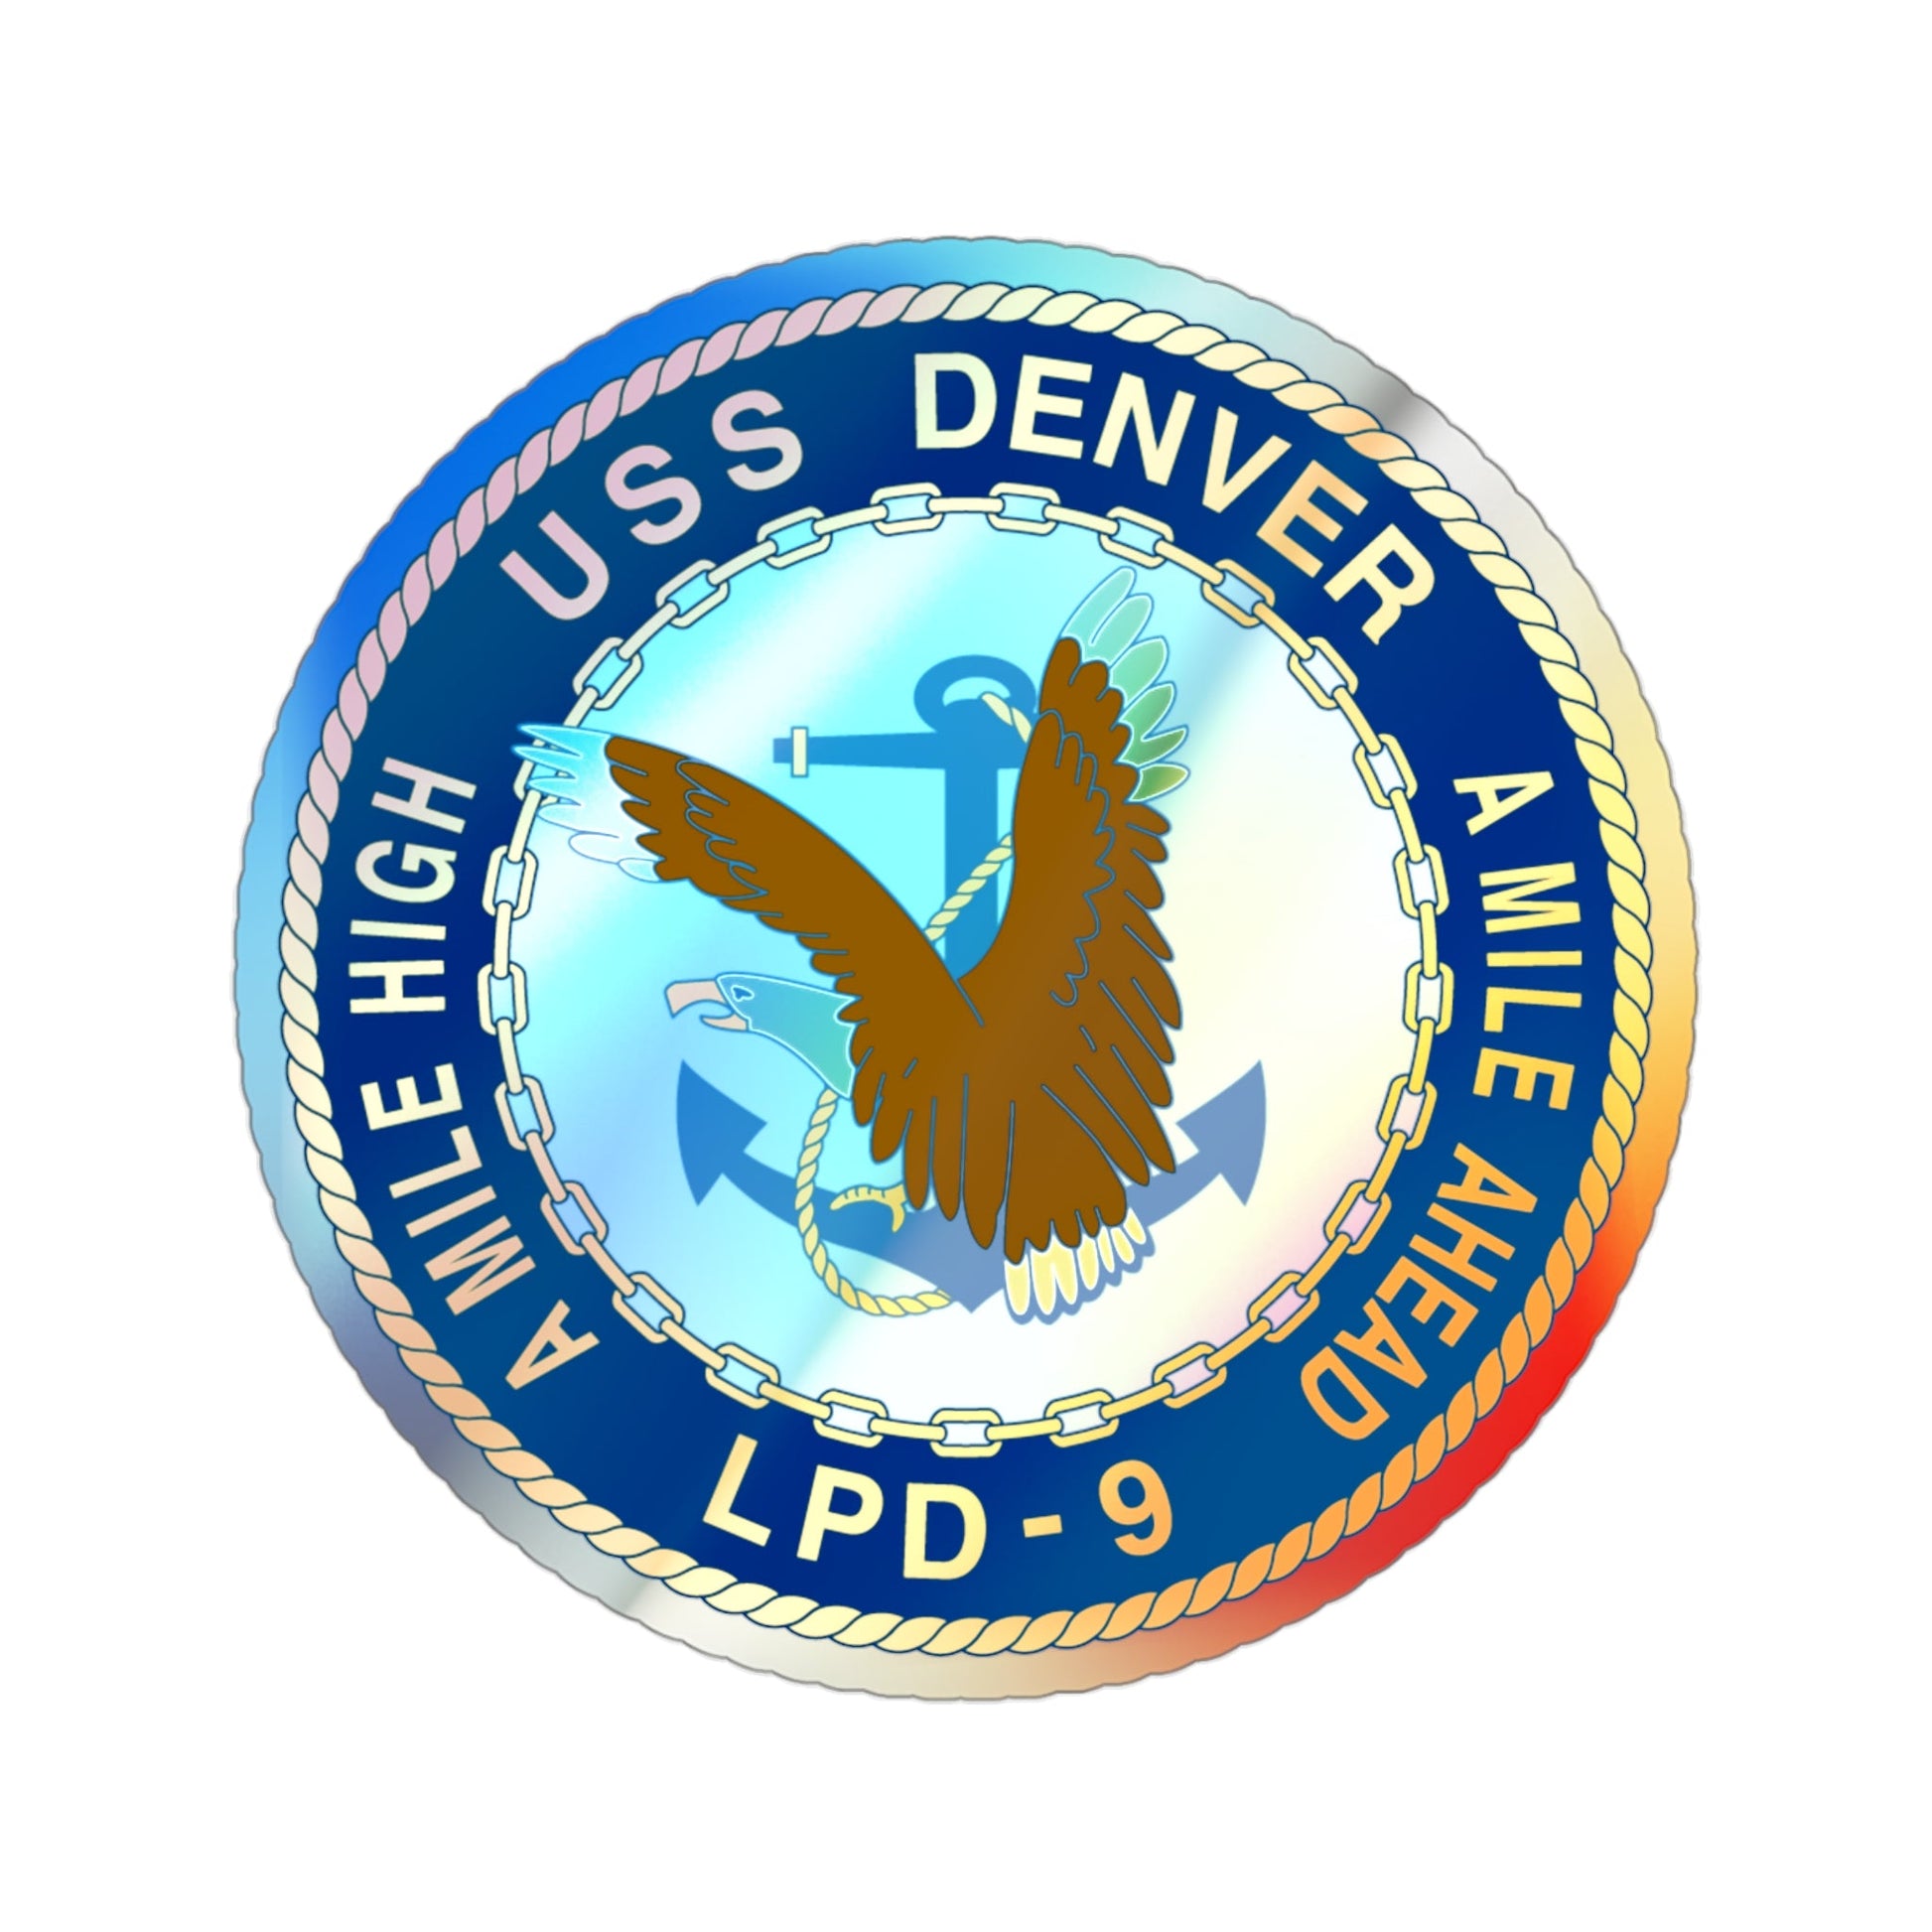 A Mile High USS Denver A Mile Ahead LPD 9 (U.S. Navy) Holographic STICKER Die-Cut Vinyl Decal-3 Inch-The Sticker Space